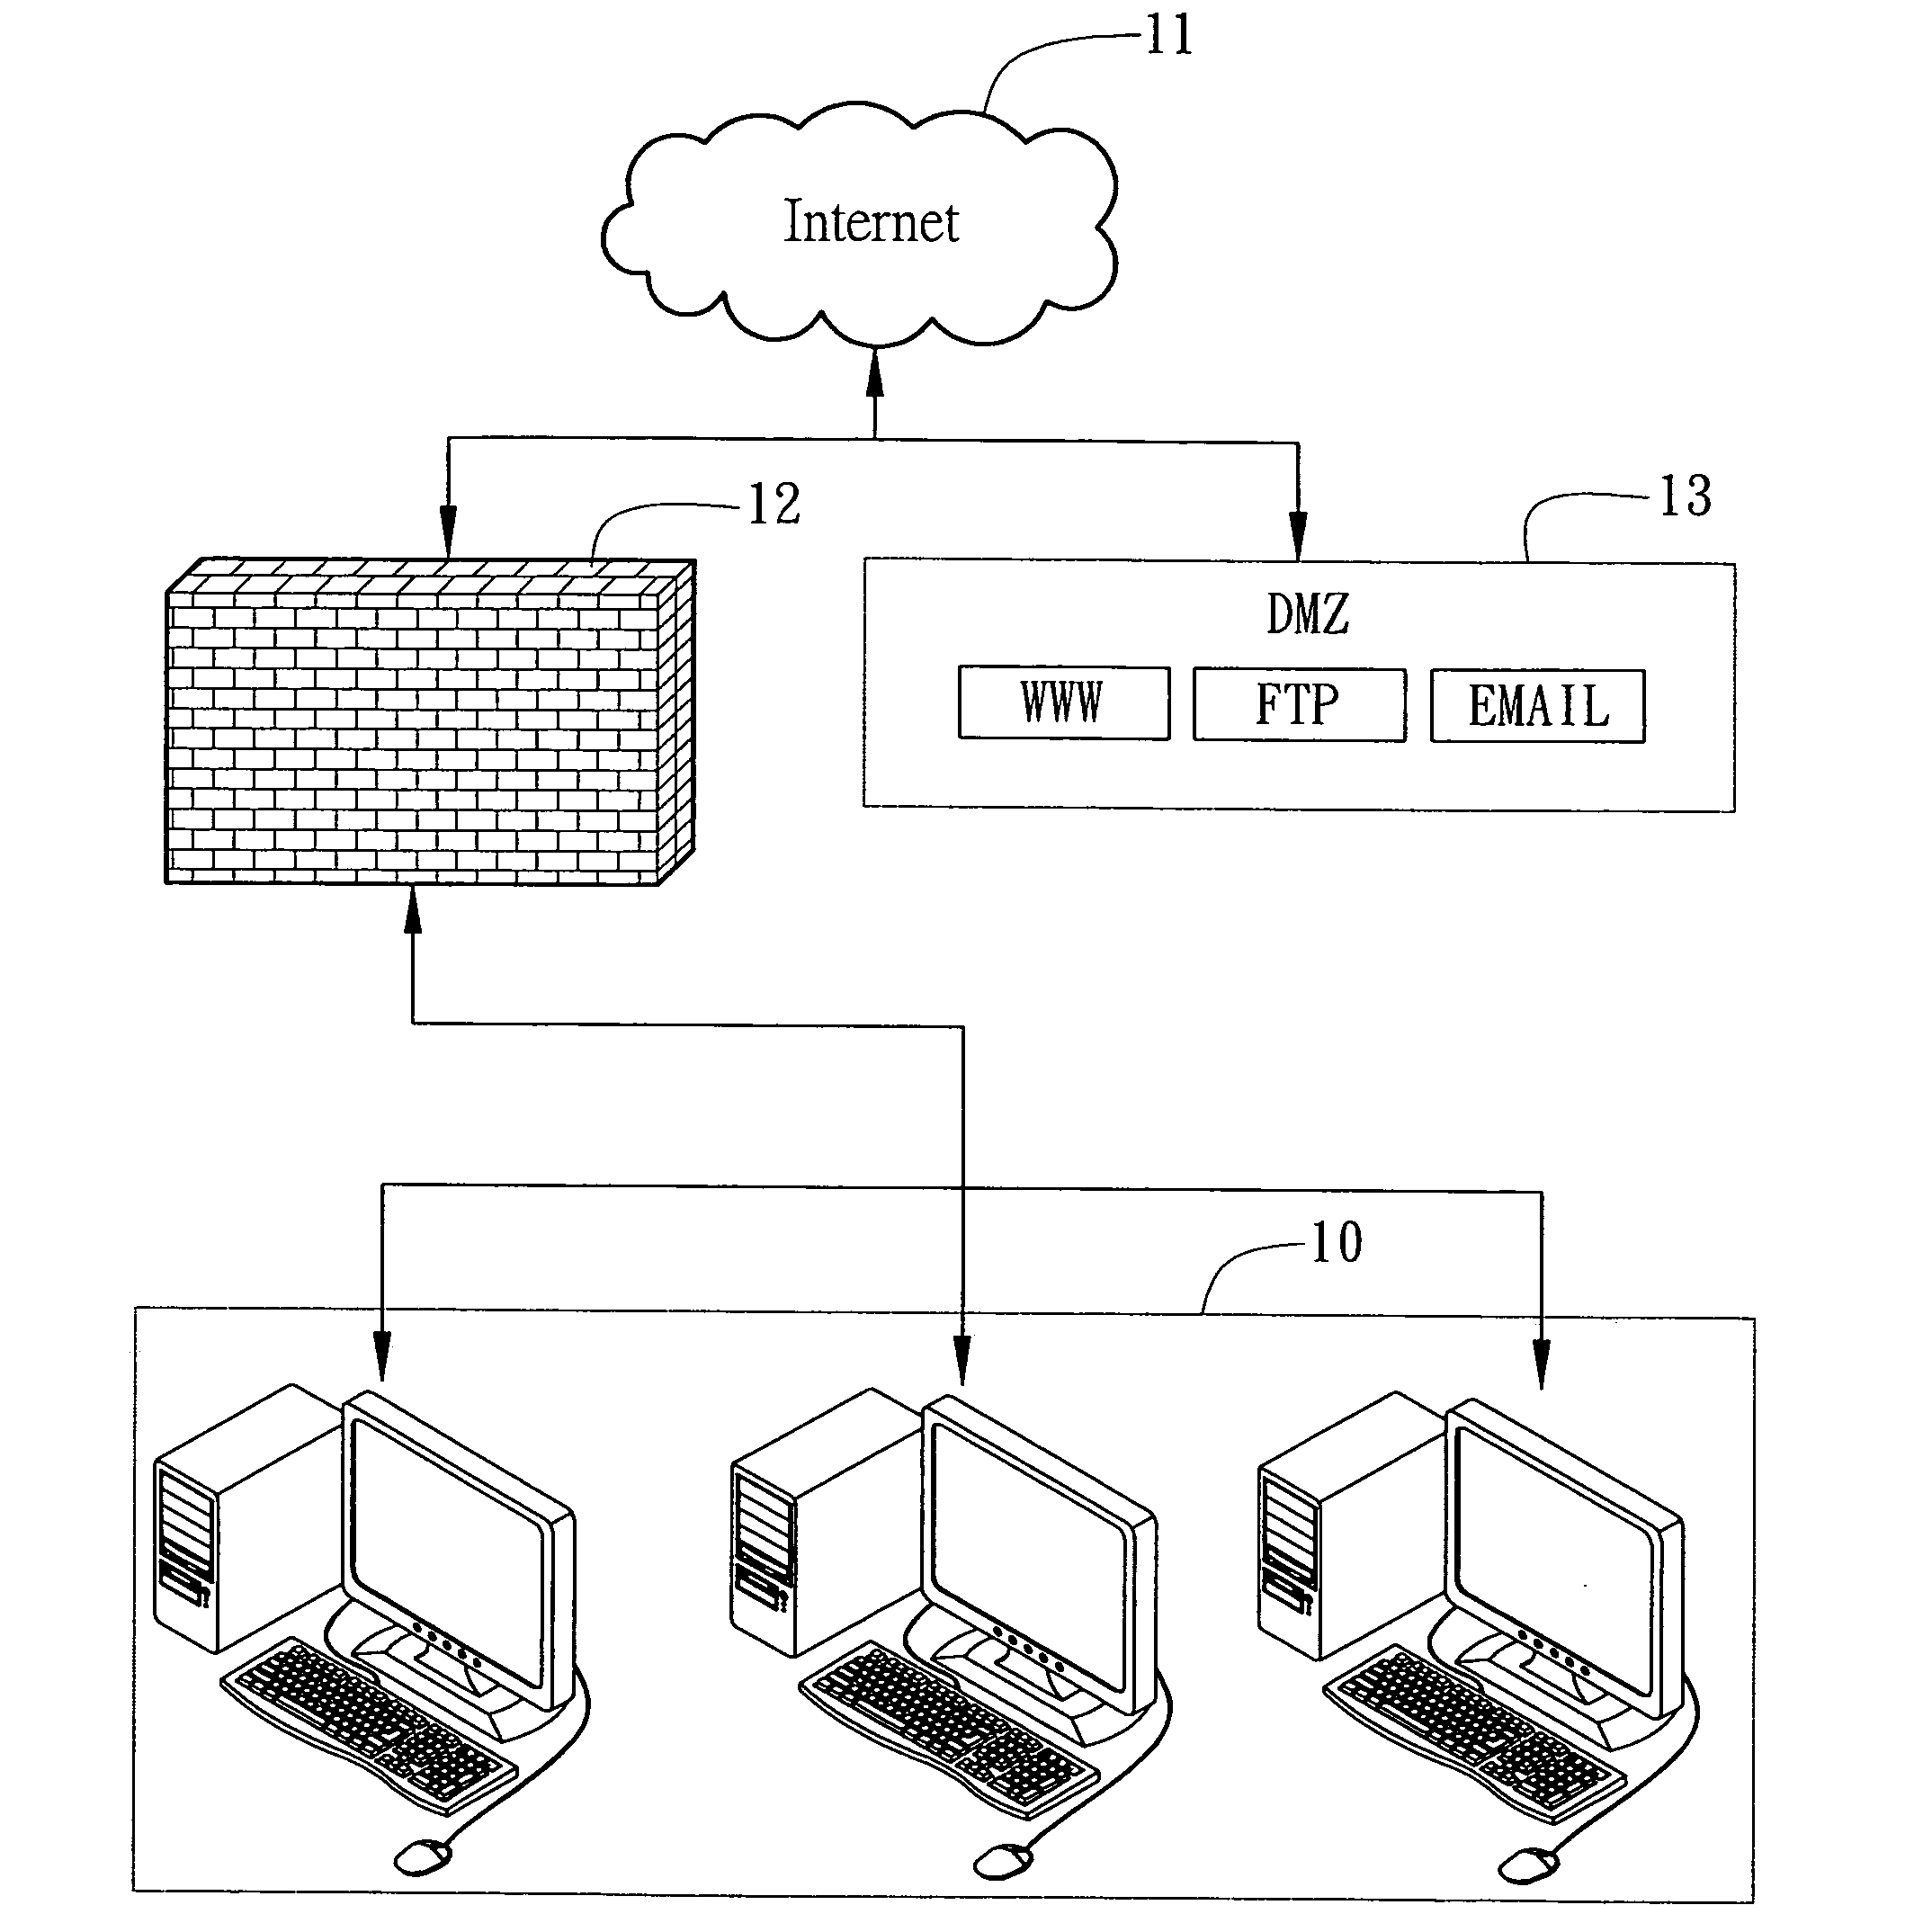 Self-setting security system and method for guarding against unauthorized access to data and preventing malicious attacks